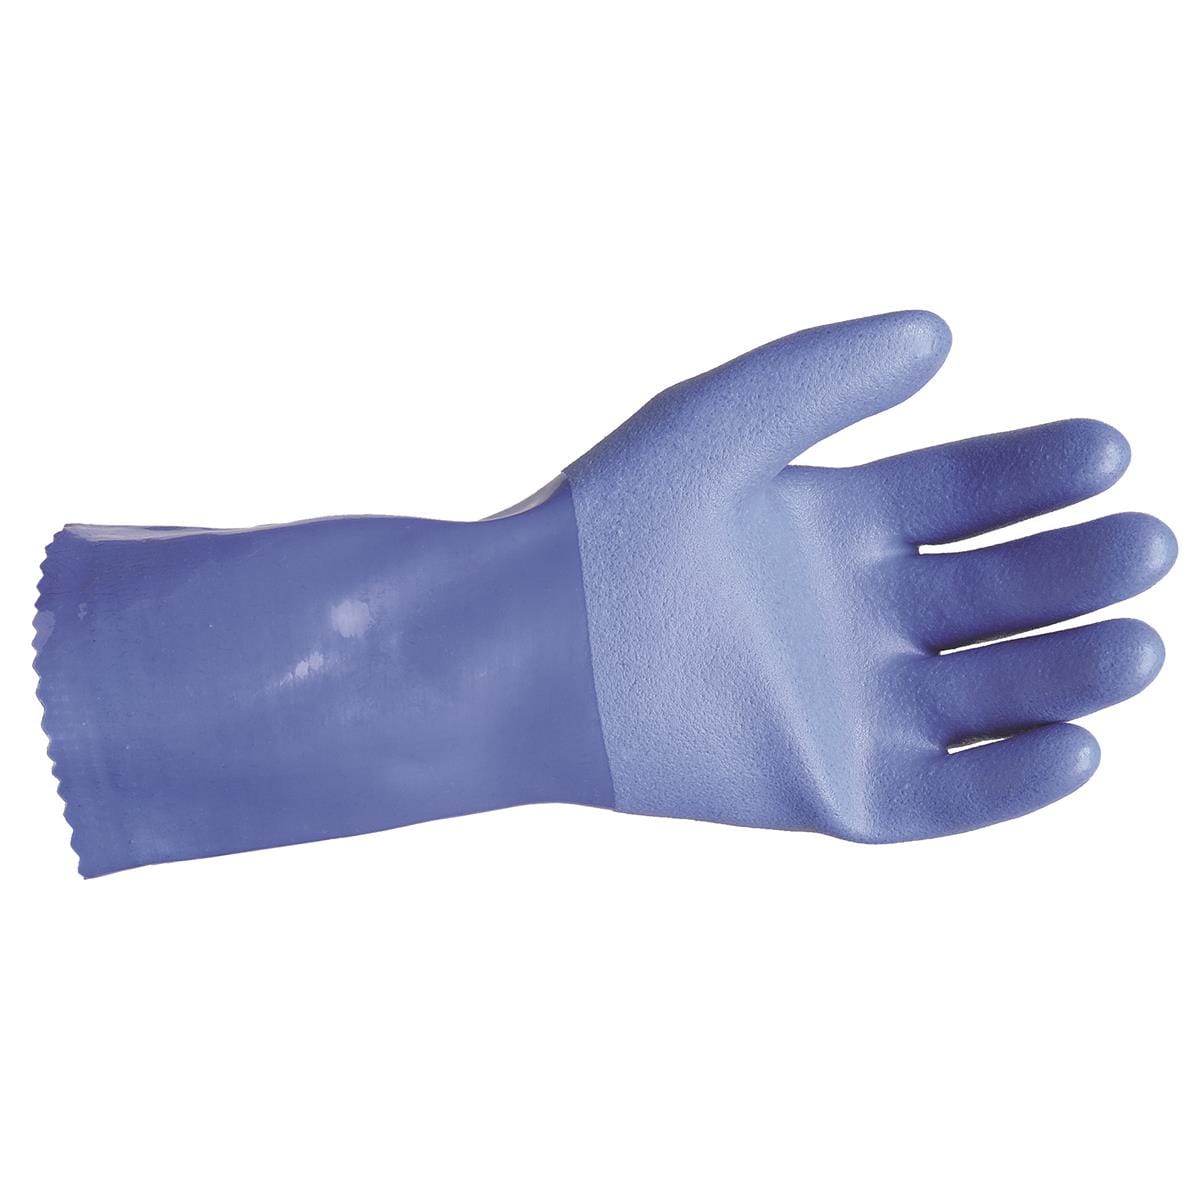 Atlas 12" PVC-Coated Gloves with Cut-Resistant Lining